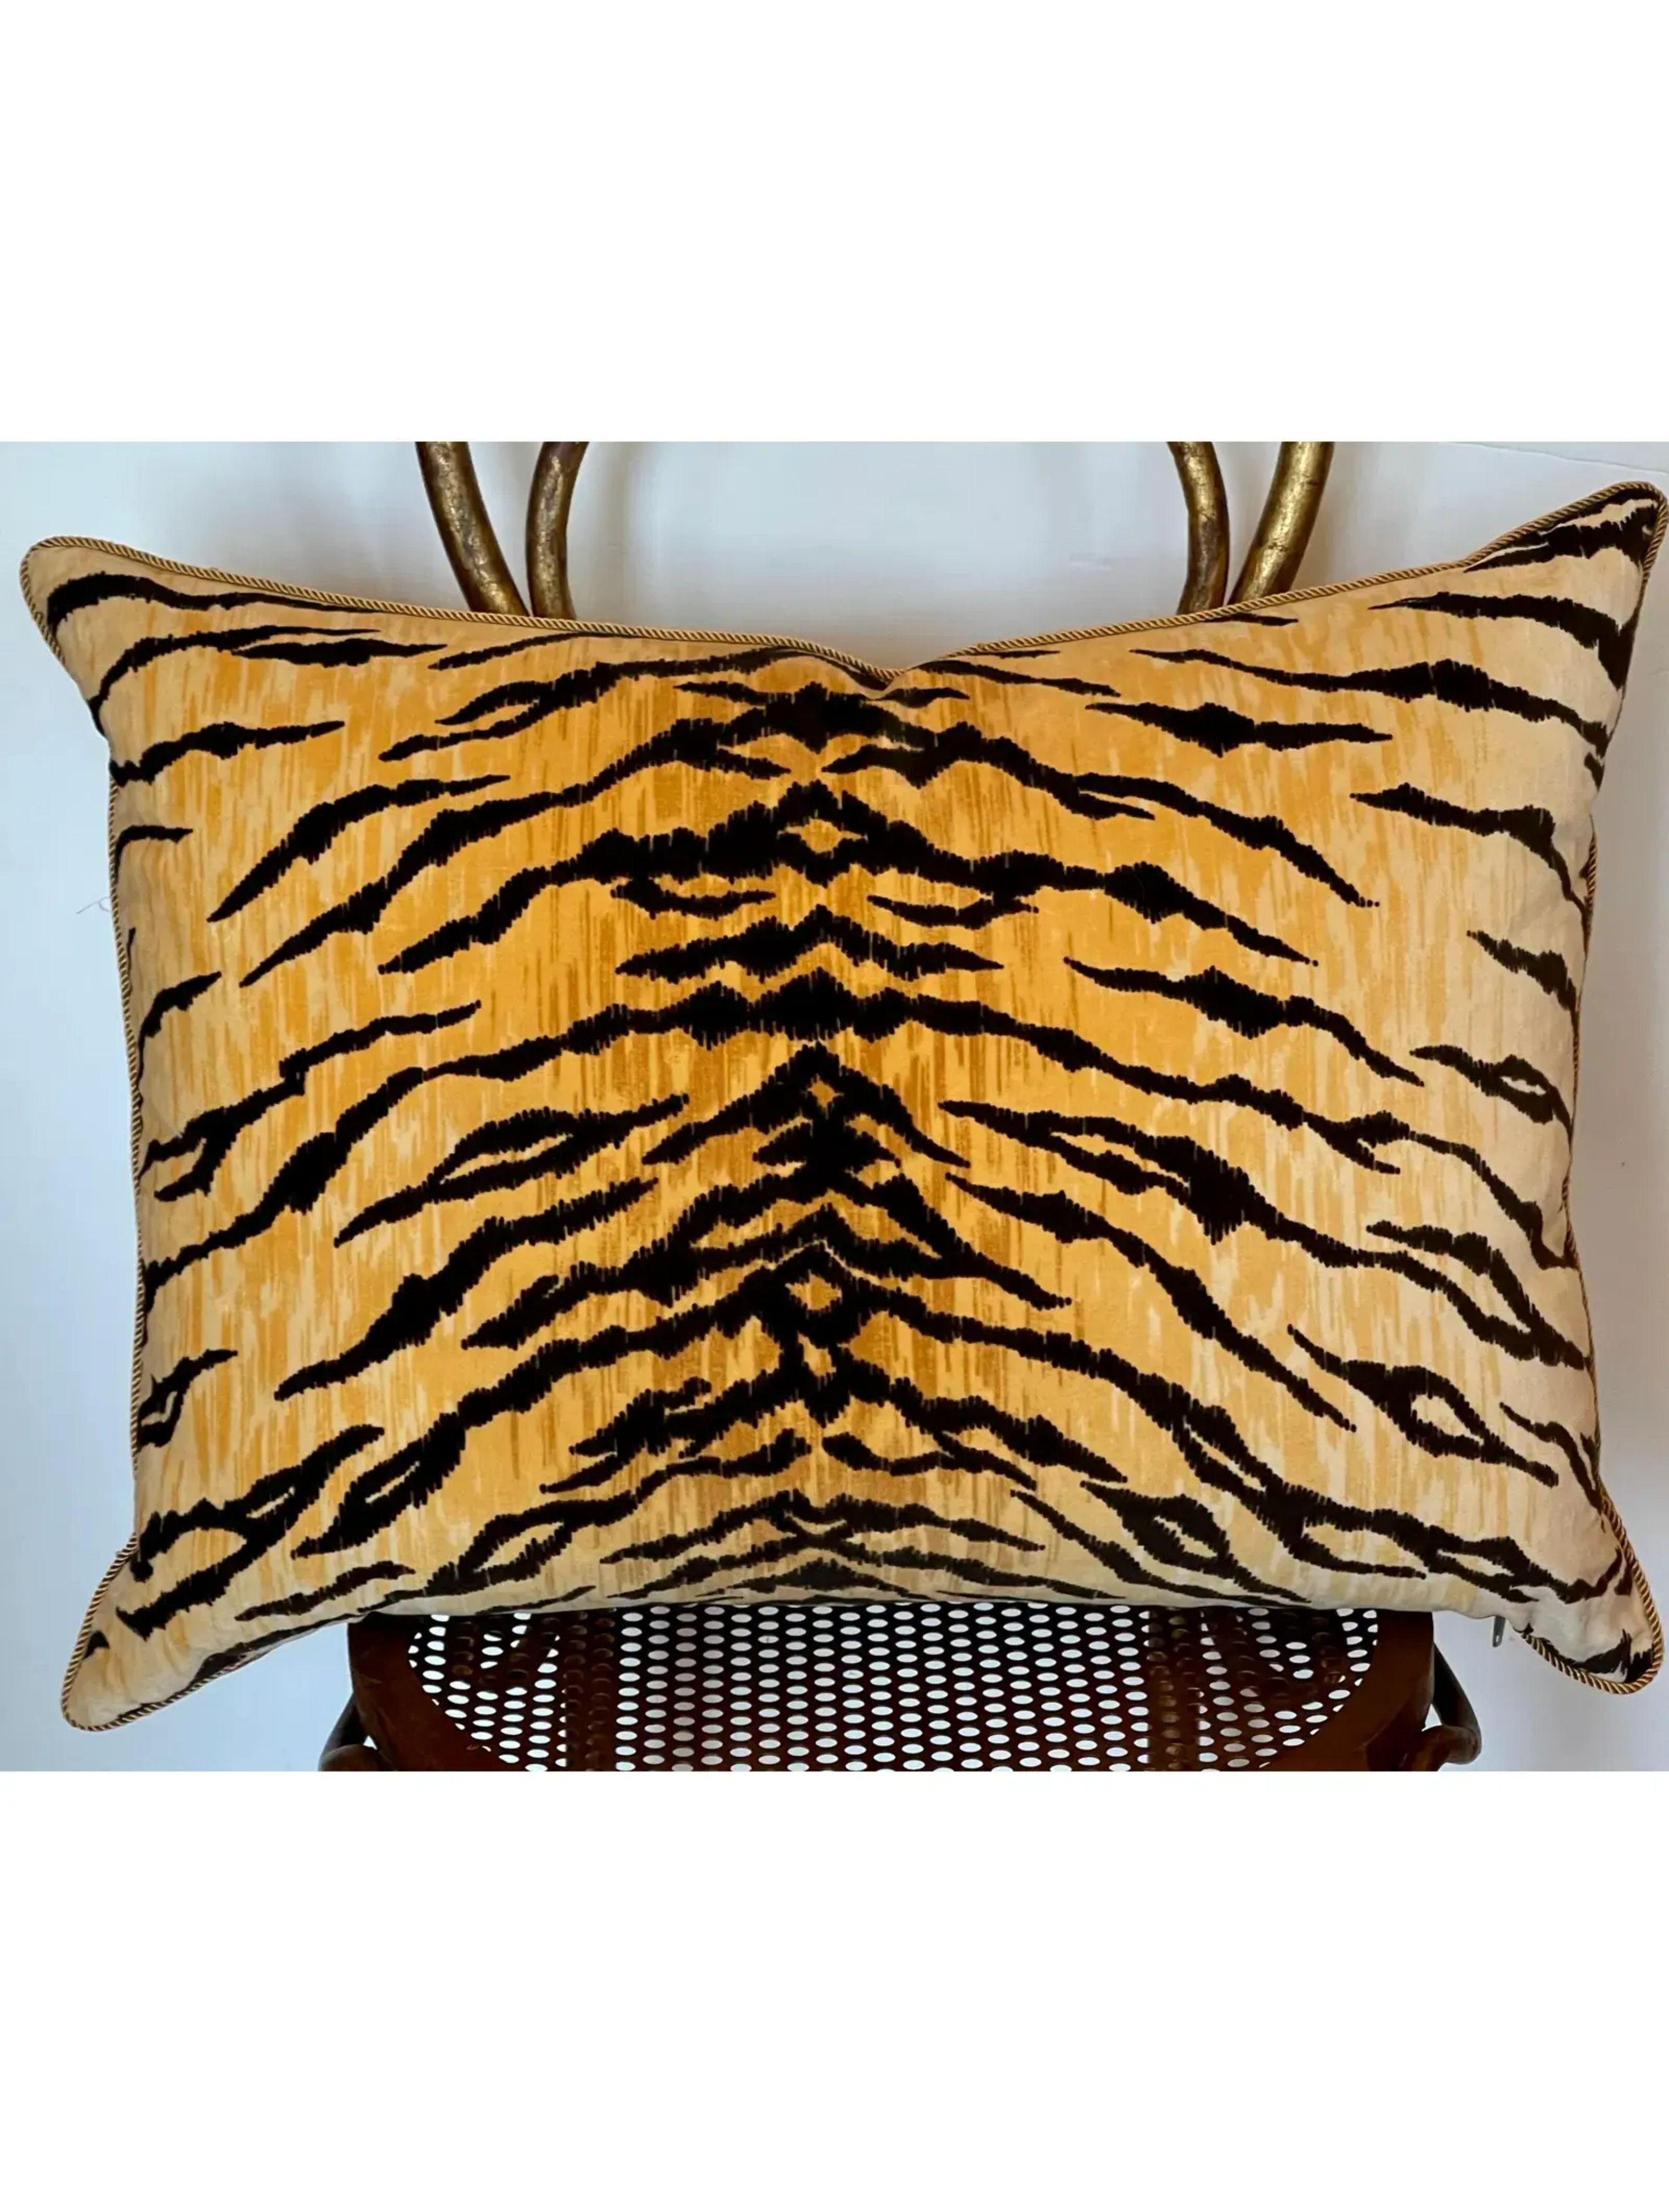 Clarence house tiger silk velvet down feather pillow.

Additional information:
Materials: Feather, silk, velvet
Color: Orange
Brand: Clarence House
Designer: Clarence House
Period: 2010s
Styles: French
Pattern: Animal Print
Item Type: